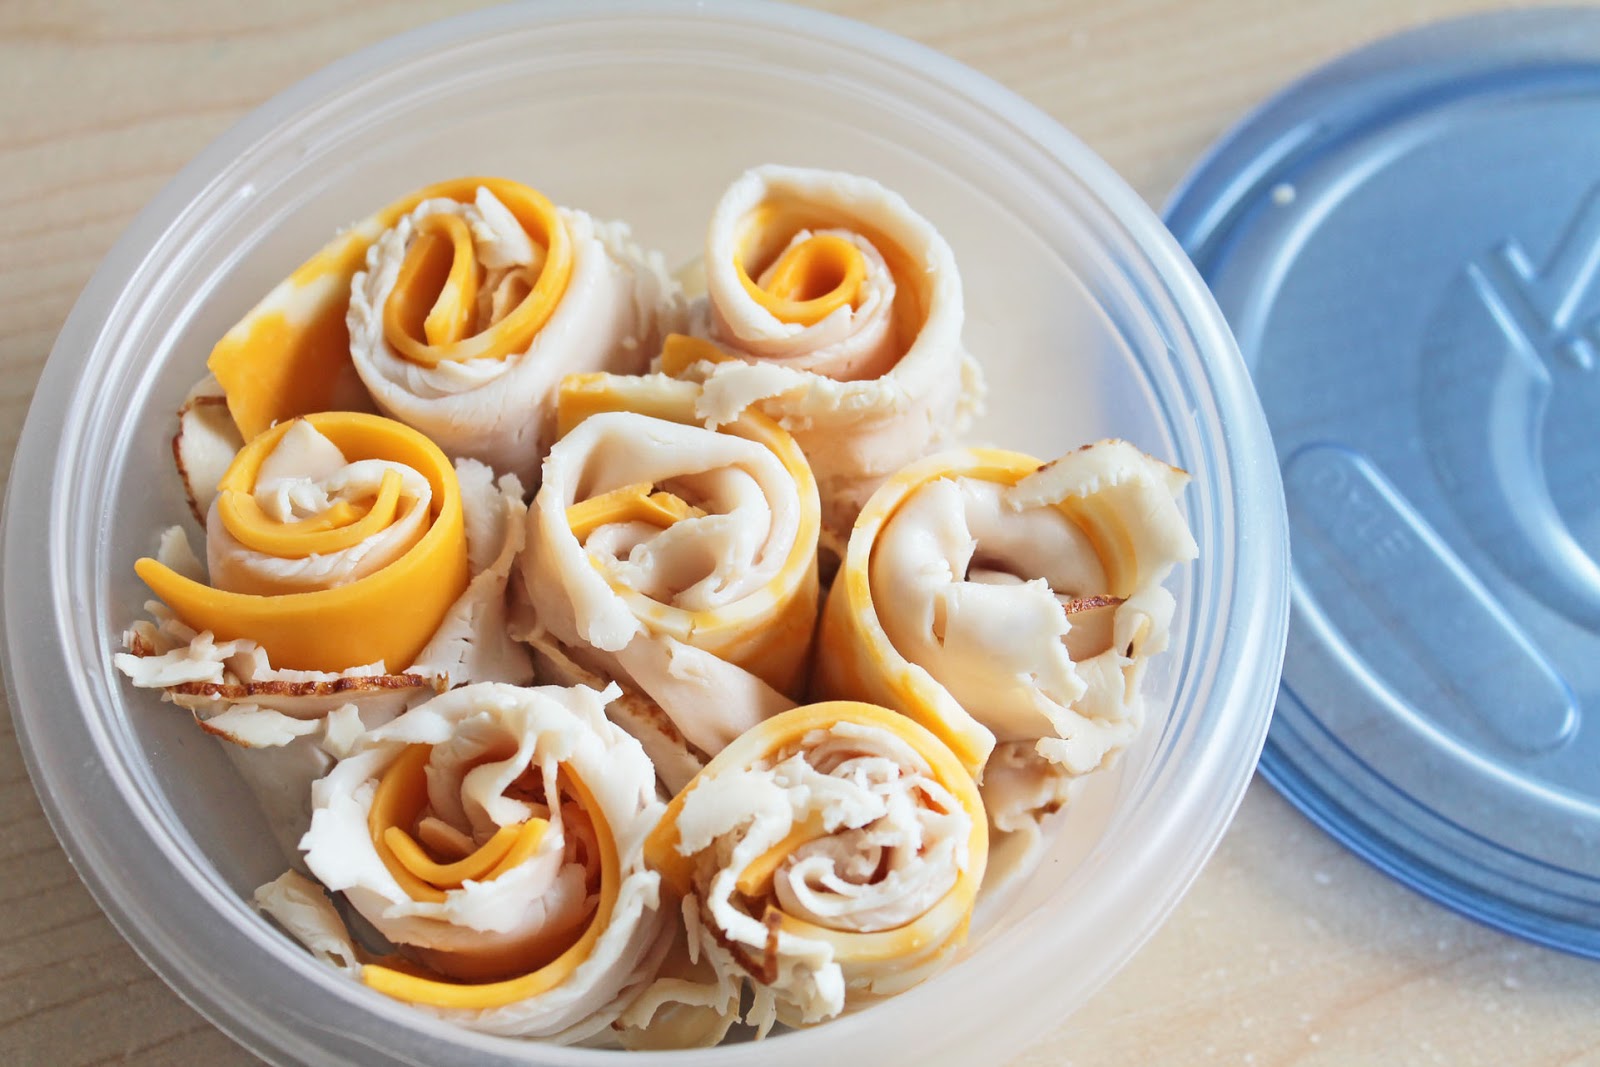 Easy to Make Snacks: Turkey and Cheese Rolls (Recipe) | Healthy Snacks